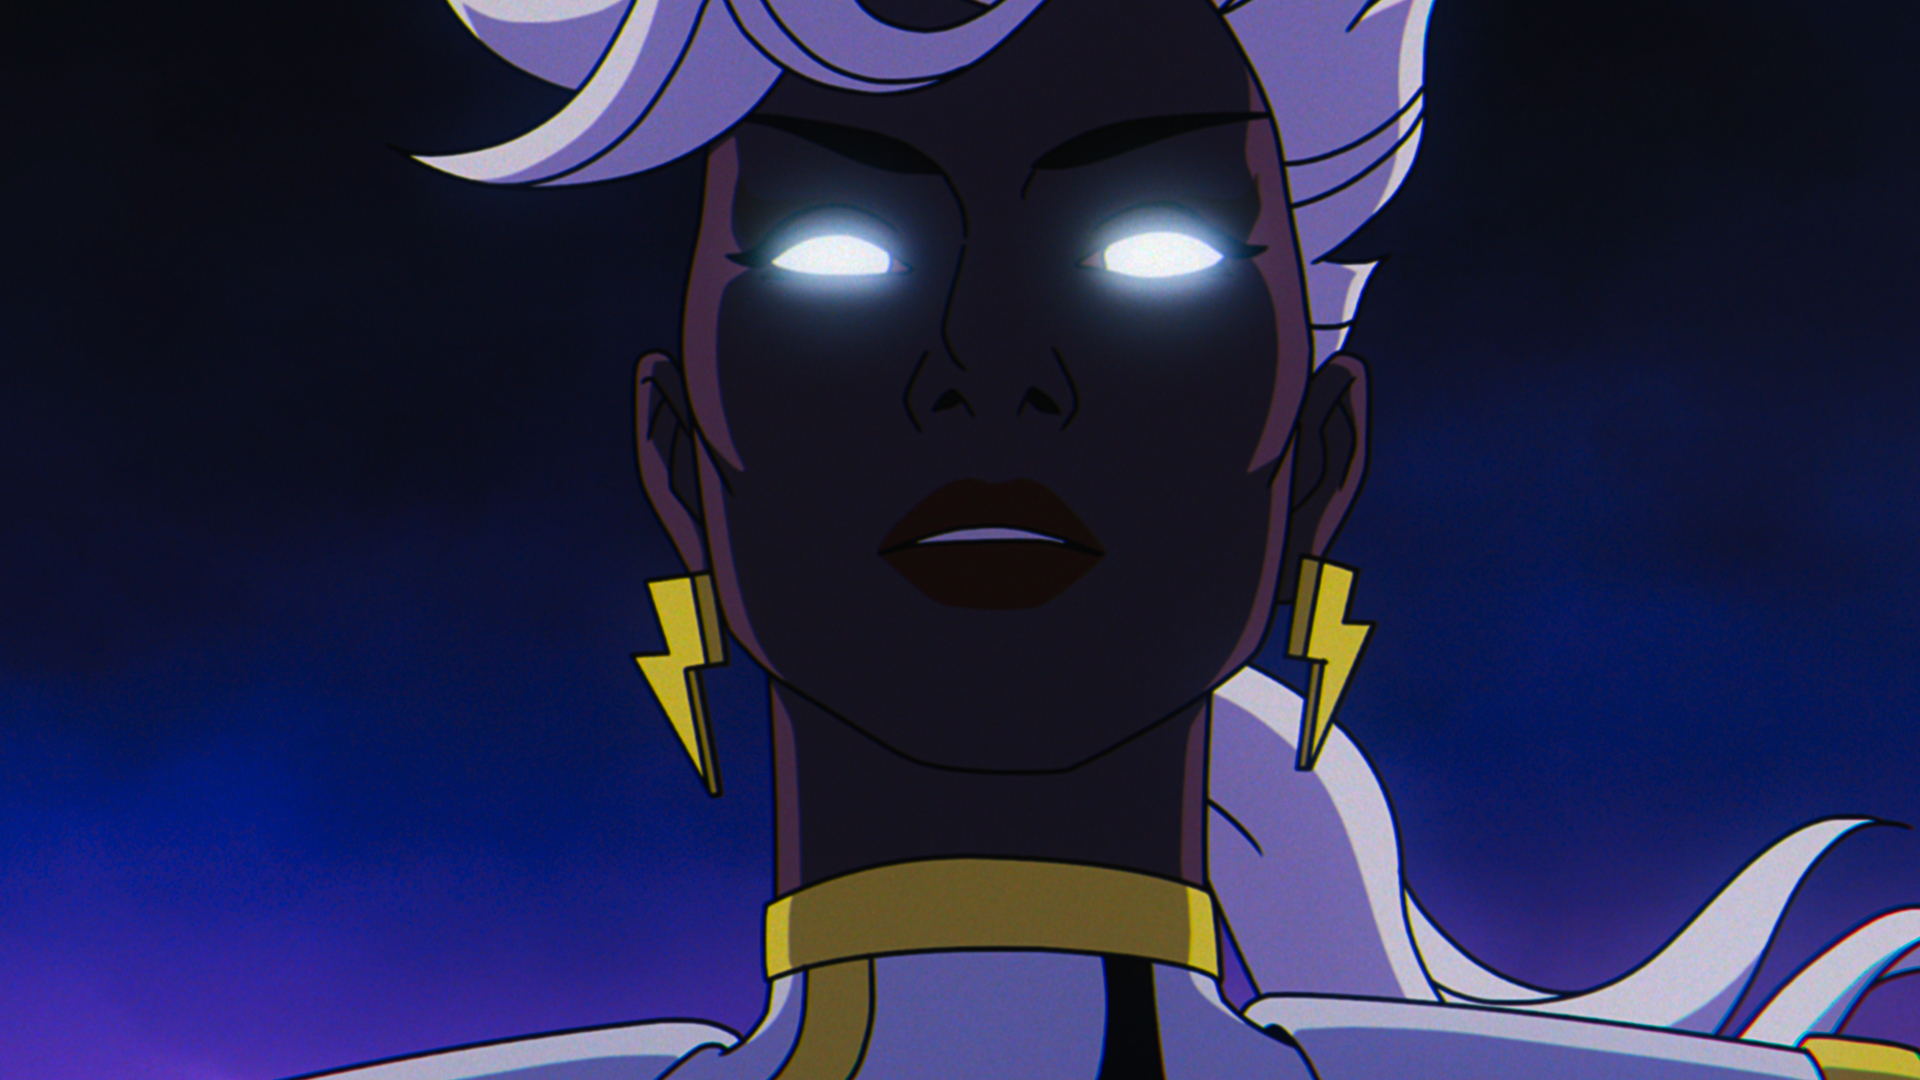 A close-up shot of Storm's face as she uses her powers in X-Men 97 on Disney Plus